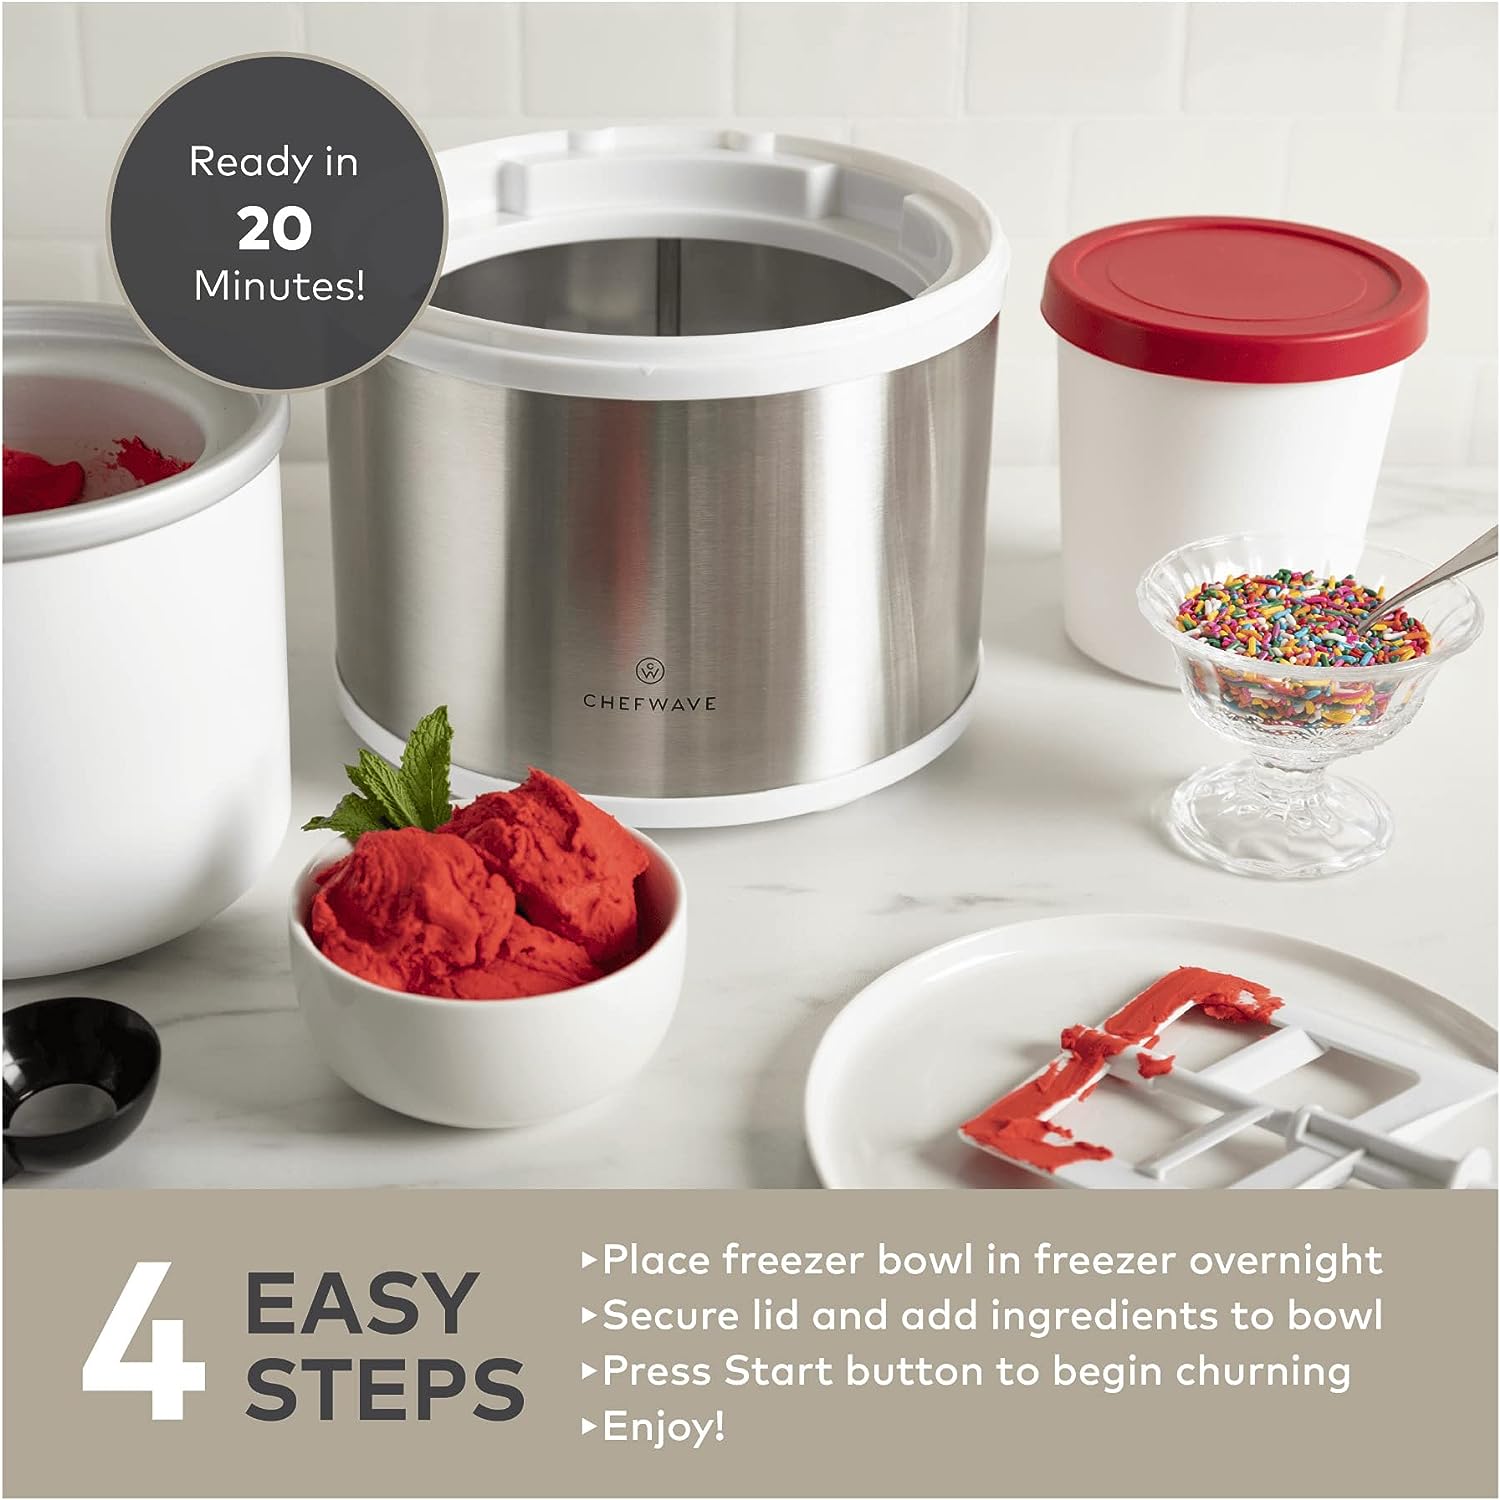 ChefWave Elado 2 Qt Automatic Frozen Yogurt, Sorbet, Gelato, Ice Cream Maker Includes 2 Pack Reusable Freezer Storage Containers 1 Qt Capacity, Recipe Book, LCD Digital Display, Adjustable Churn Time